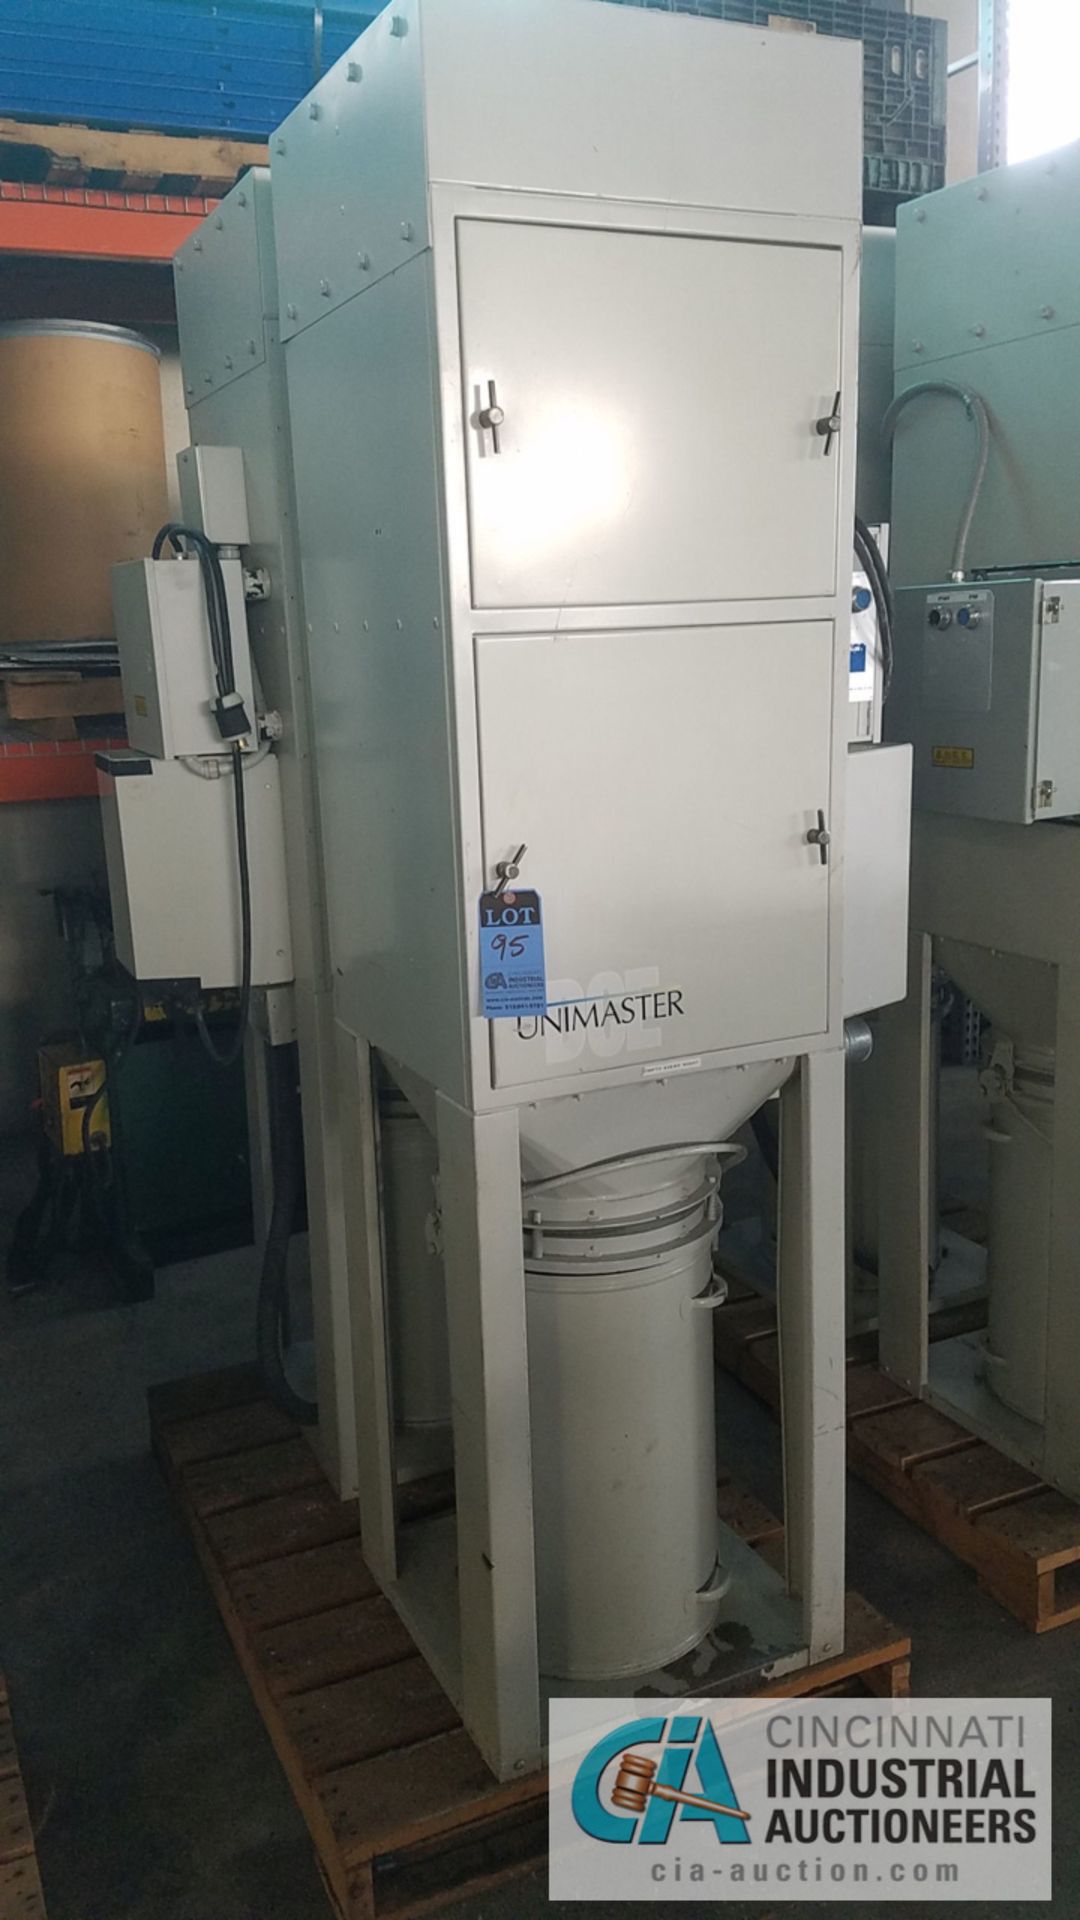 1 H.P. DCE MODEL UMA73G1AD UNIMASTER DUST COLLECTOR, S/N 98-1353/03